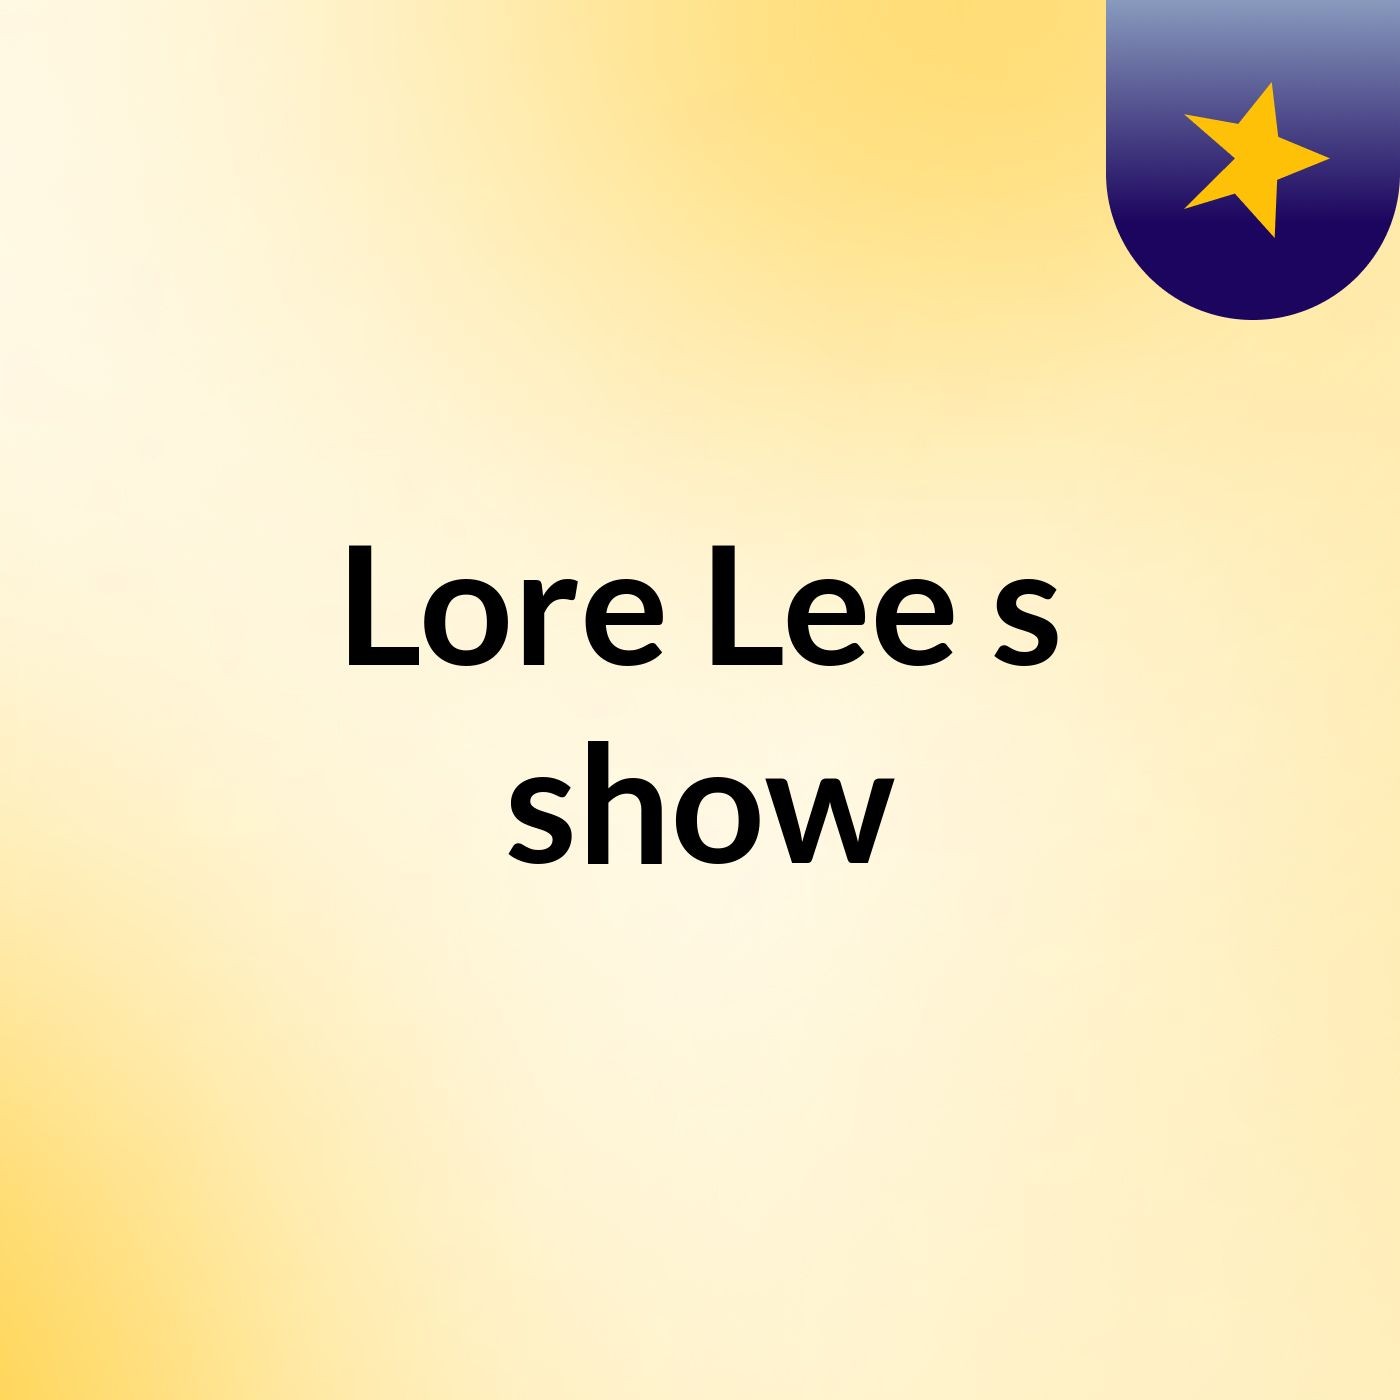 Lore Lee's show